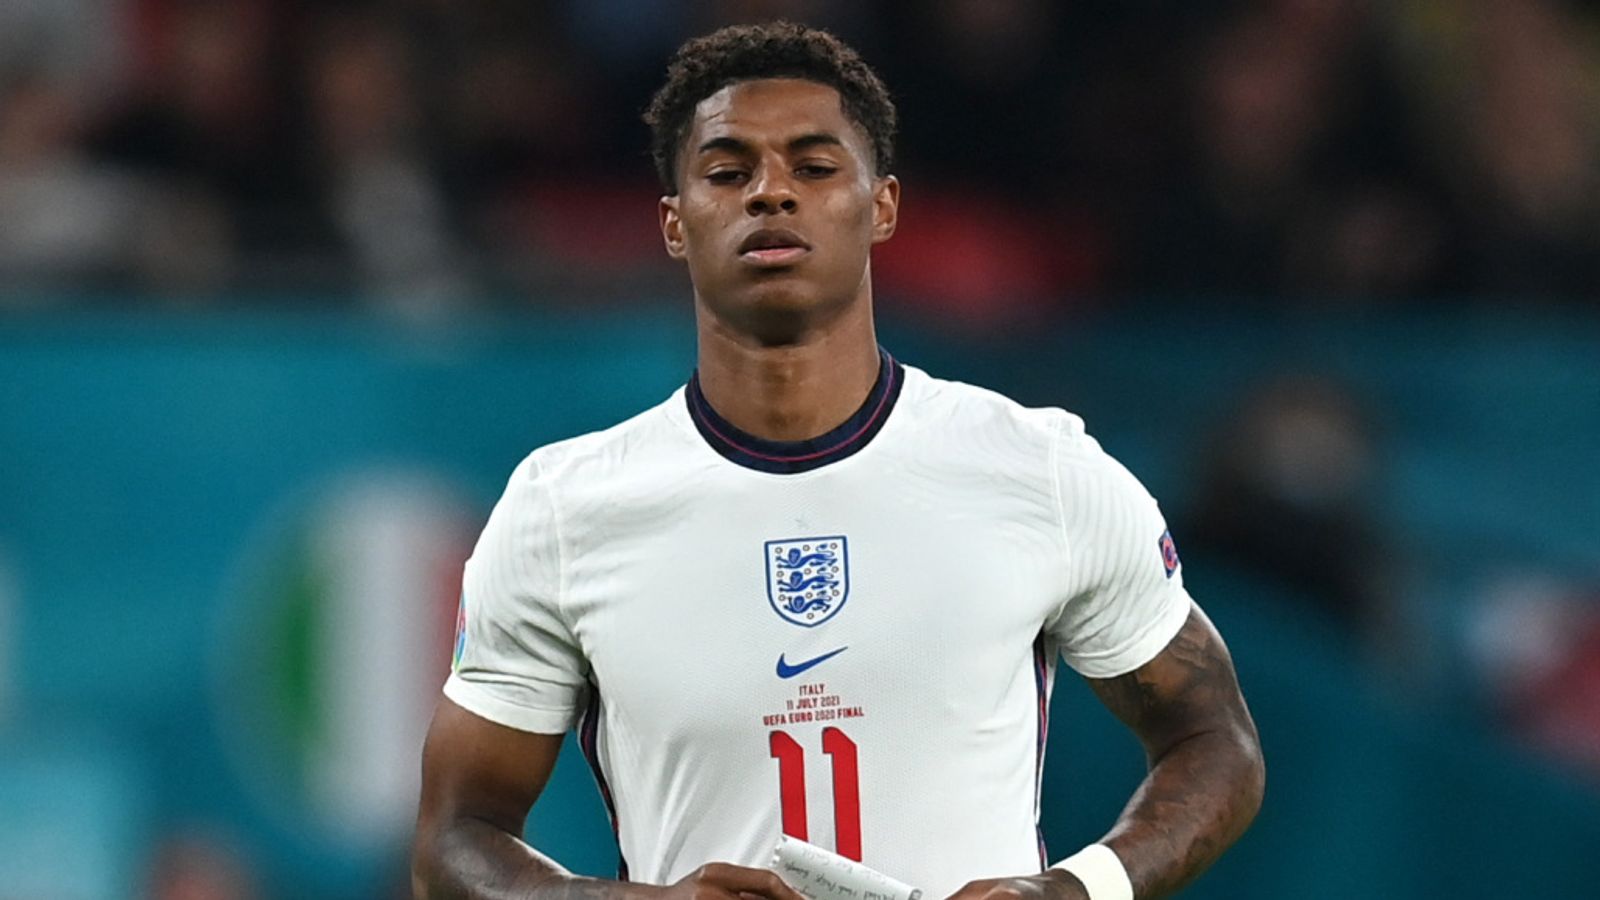 Marcus Rashford: England forward sorry for penalty miss but 'not for who I  am' after racist abuse | Football News | Sky Sports